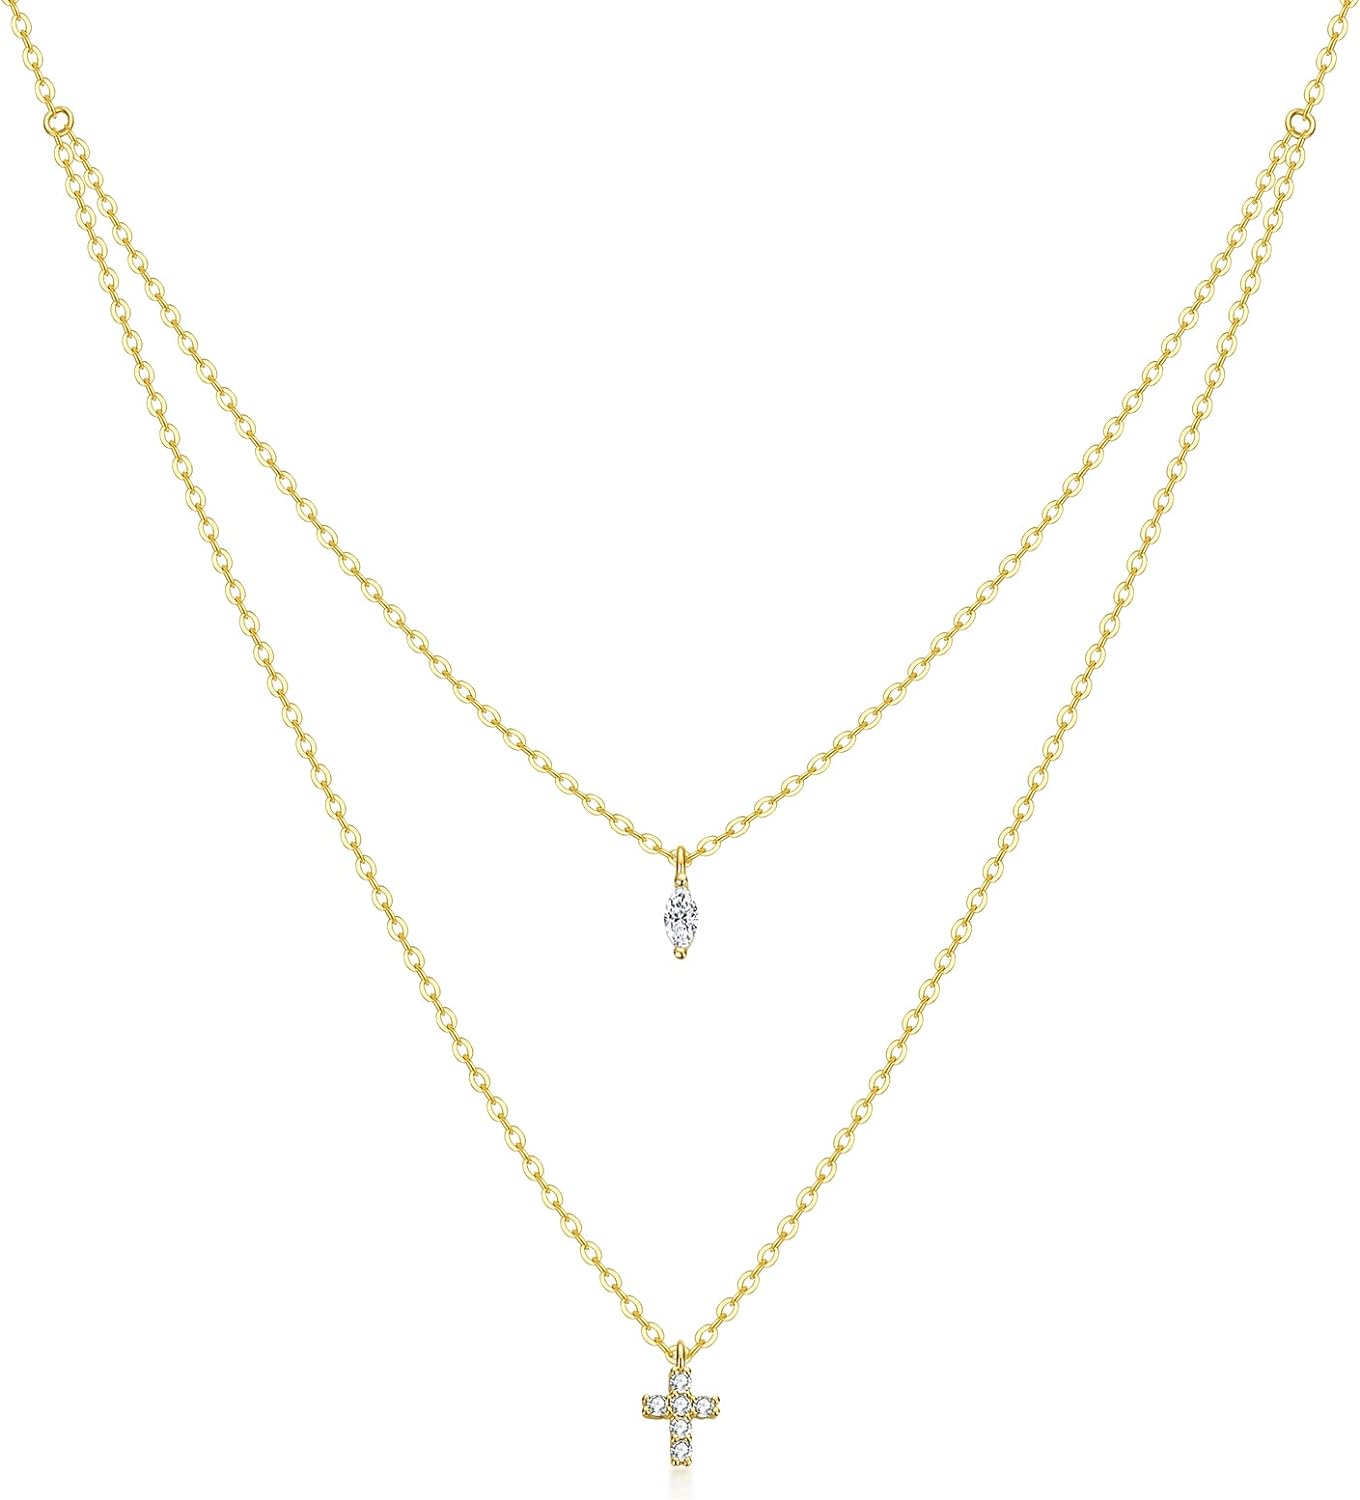 craboua Cross Dainty Layered Necklace Jewelry Gifts for Mother's Day 18K Gold Plated Tiny Cute Cross Faith Pendant Necklaces for women, Gifts for new Mother New Mom Grandma